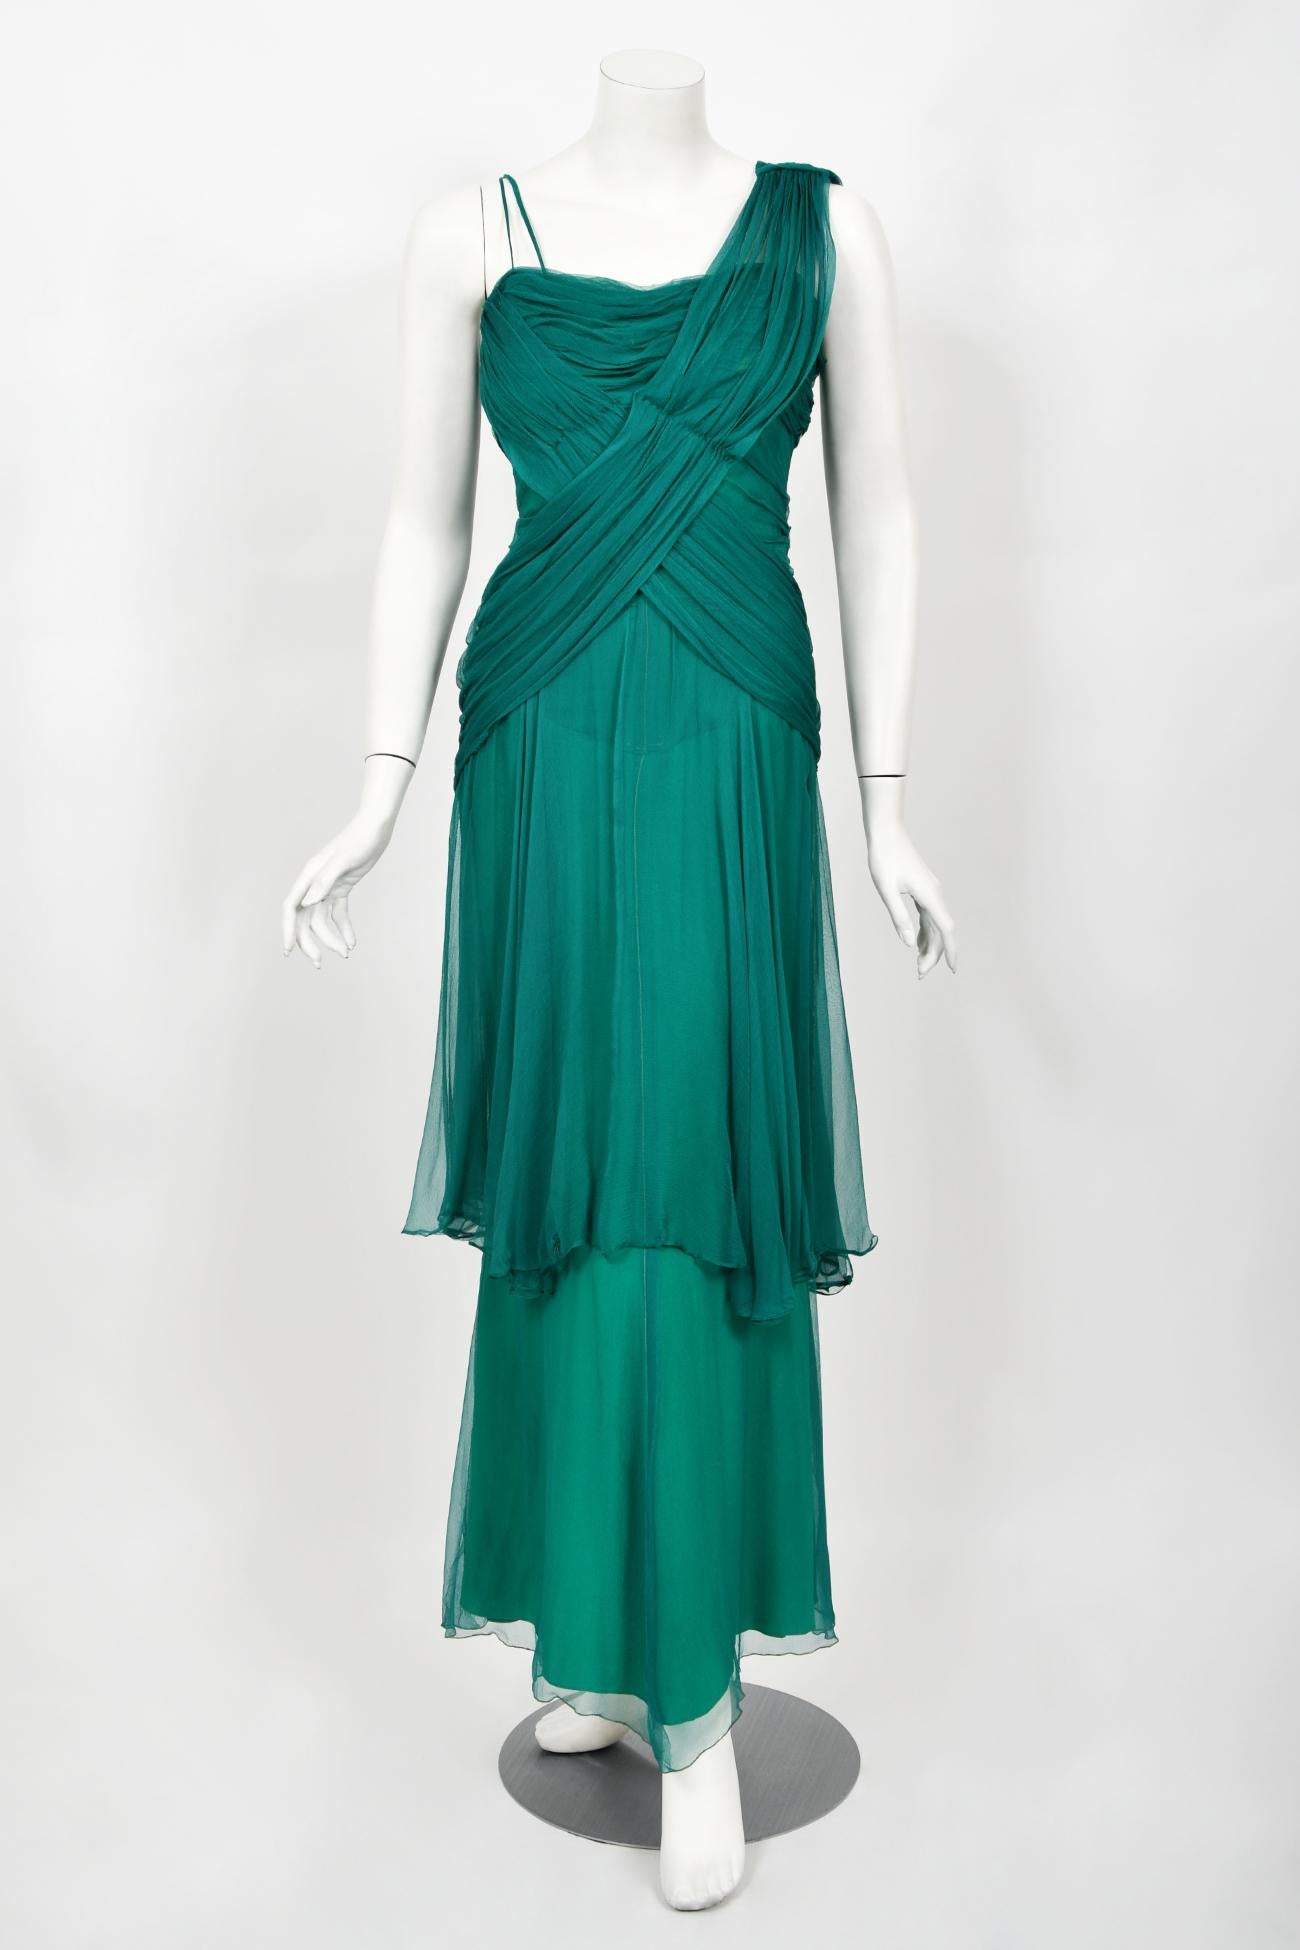 Vintage 1950's Irene Lentz Couture Teal Green Draped Silk Grecian Goddess Gown For Sale 6